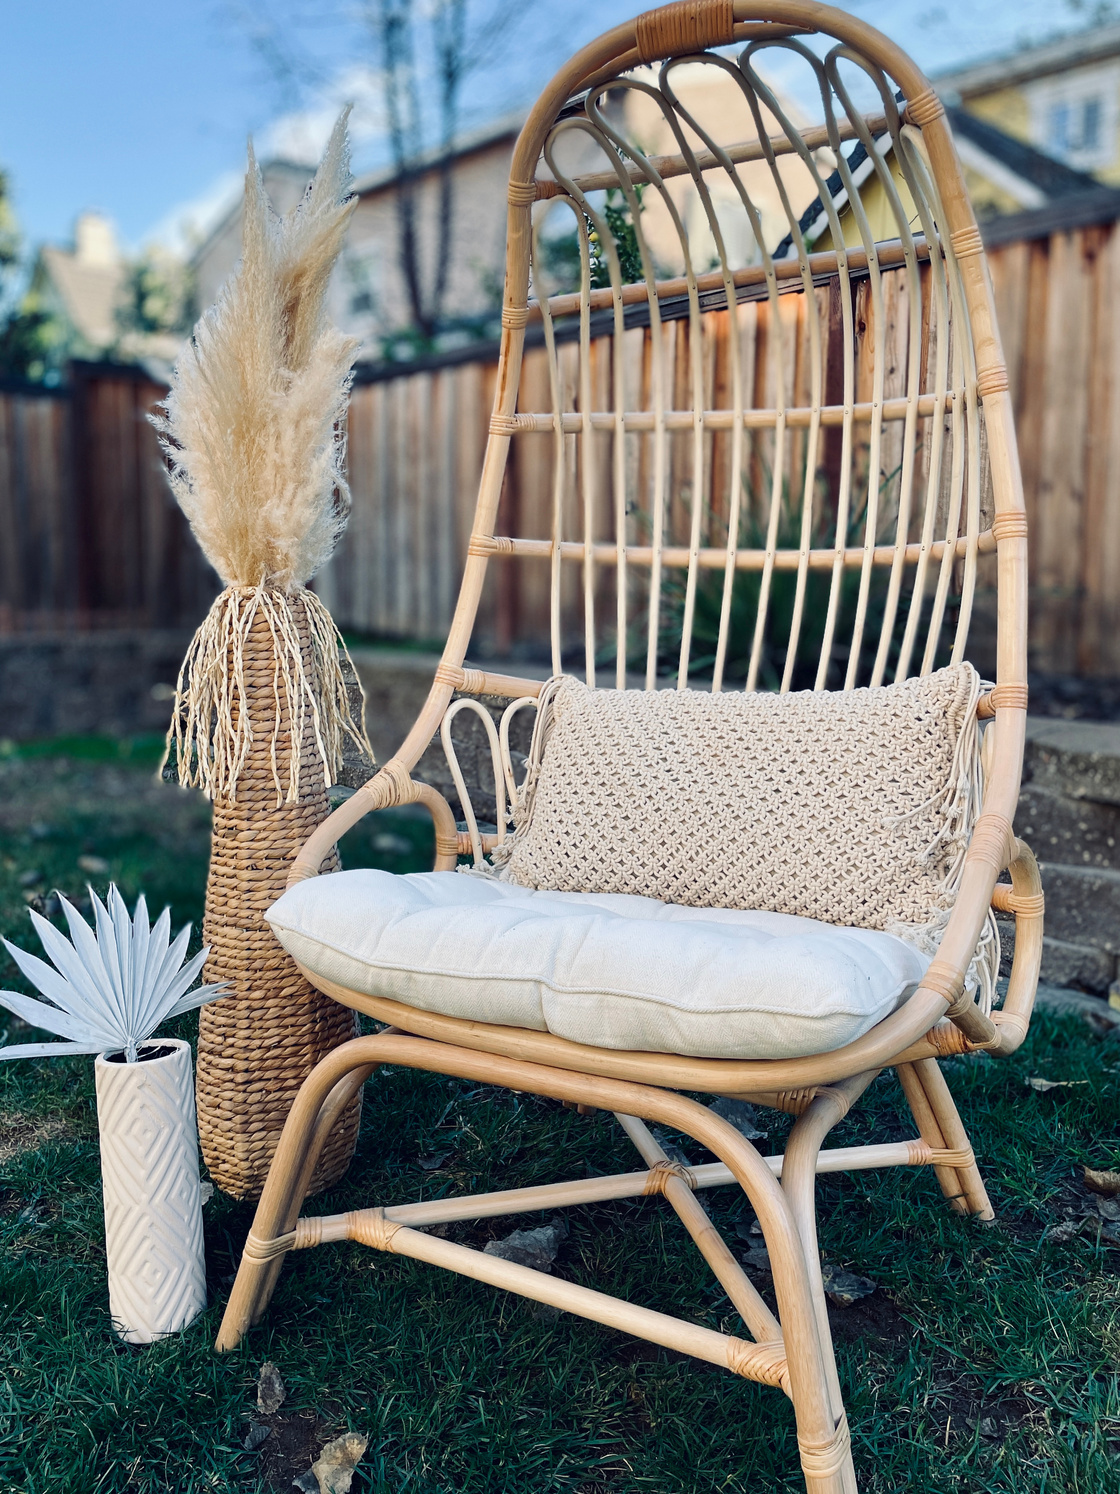 a rattan chair with pillows and a vase on the grass to rent. boho chair